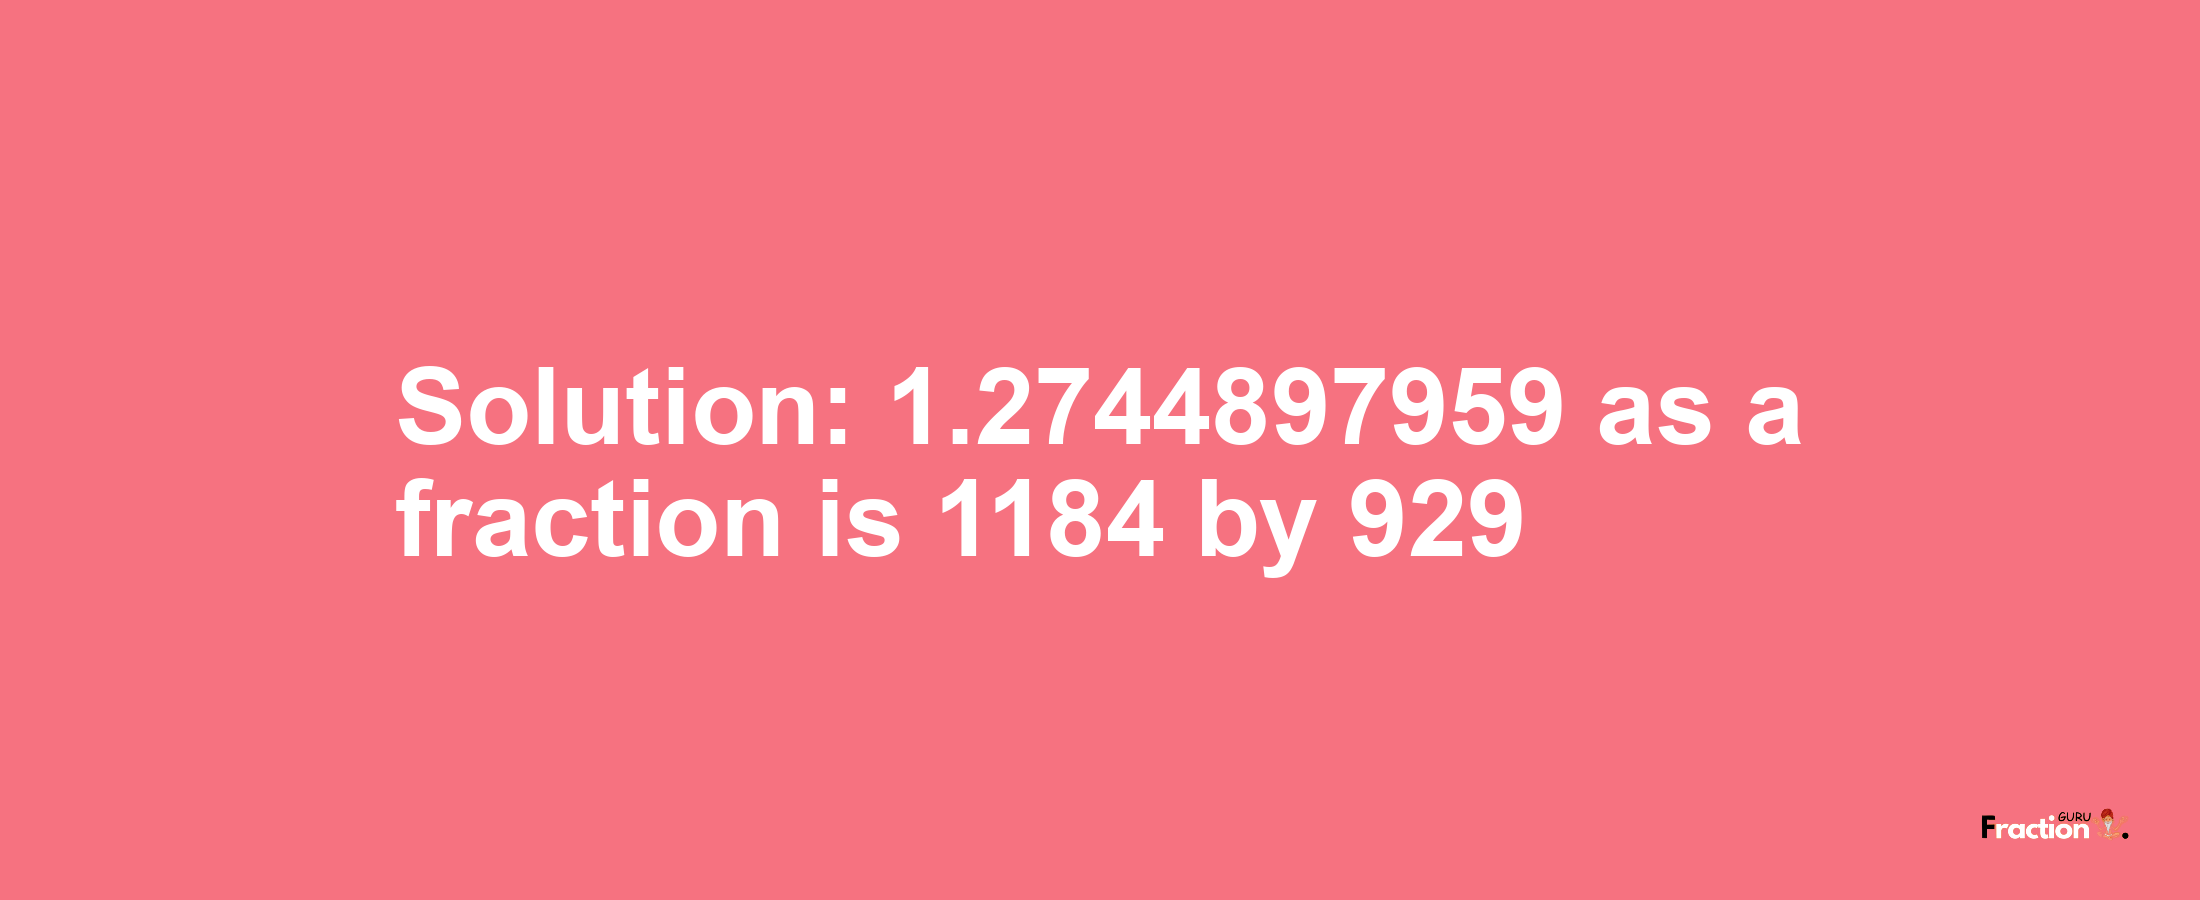 Solution:1.2744897959 as a fraction is 1184/929